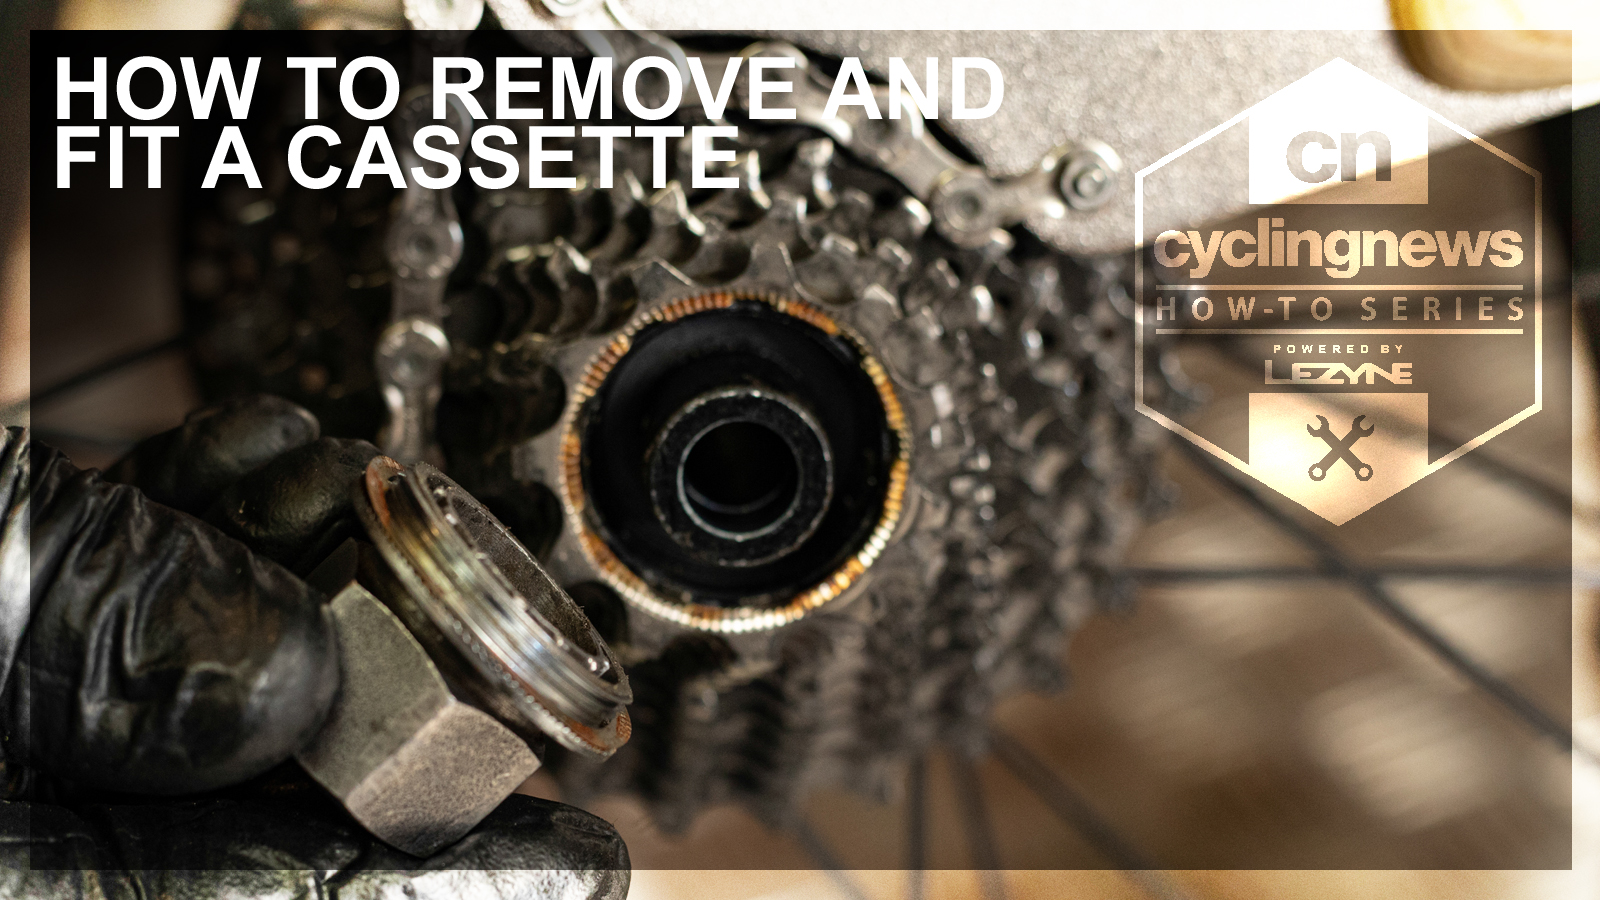 How To Remove A Bike Cassette How to remove and refit the cassette on your bike | Cyclingnews